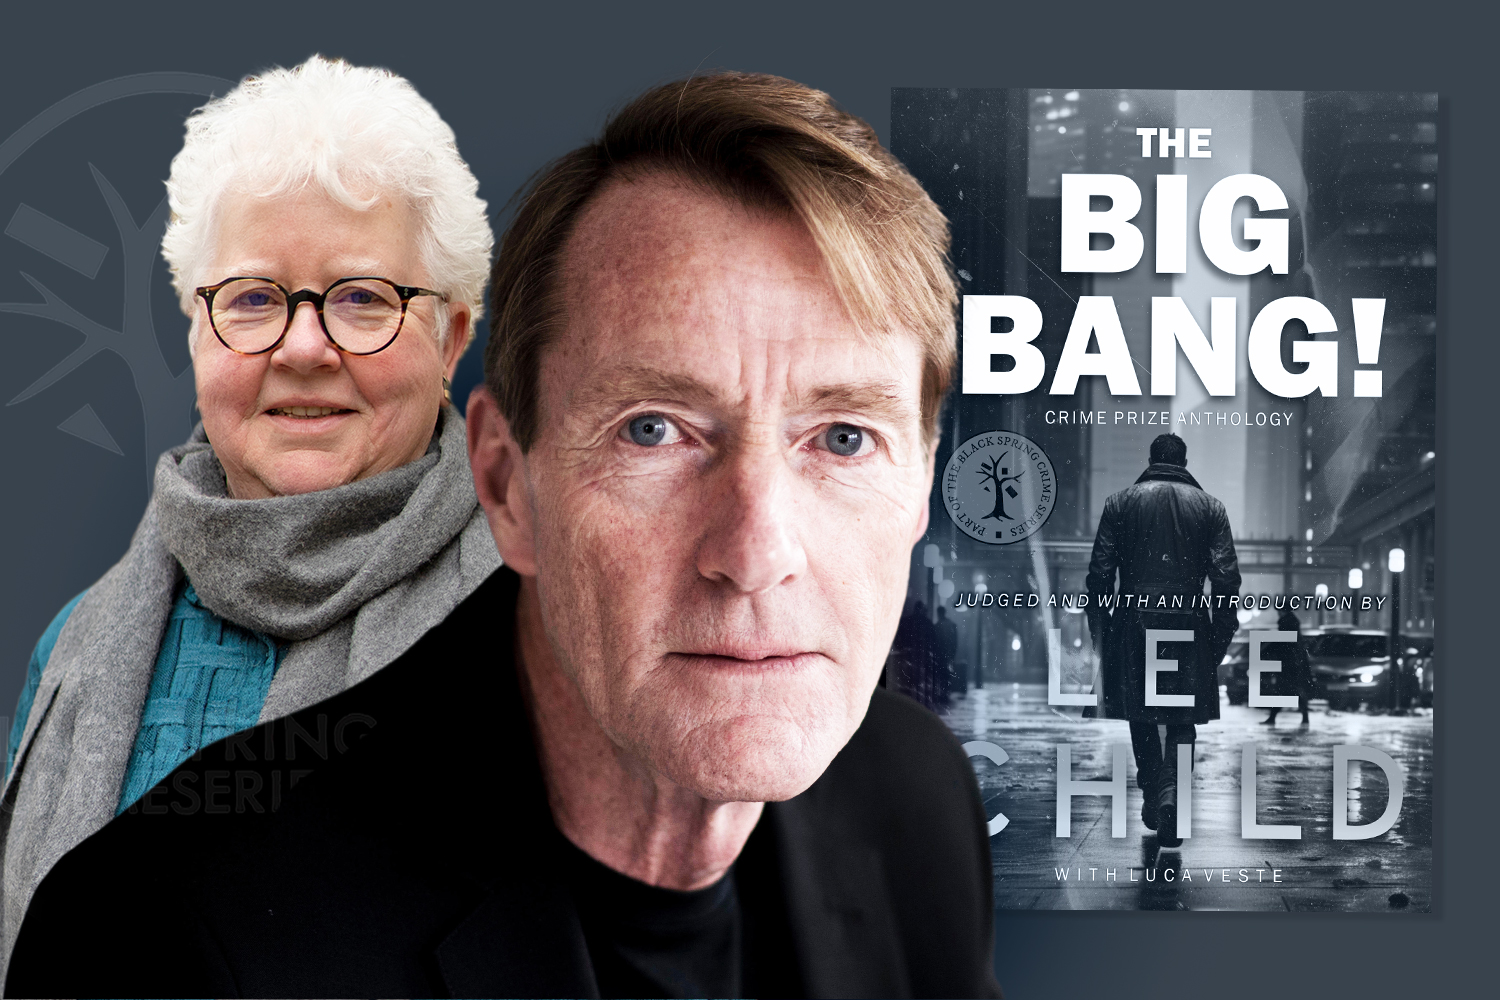 Small press signs up Lee Child and Val McDermid to help it survive